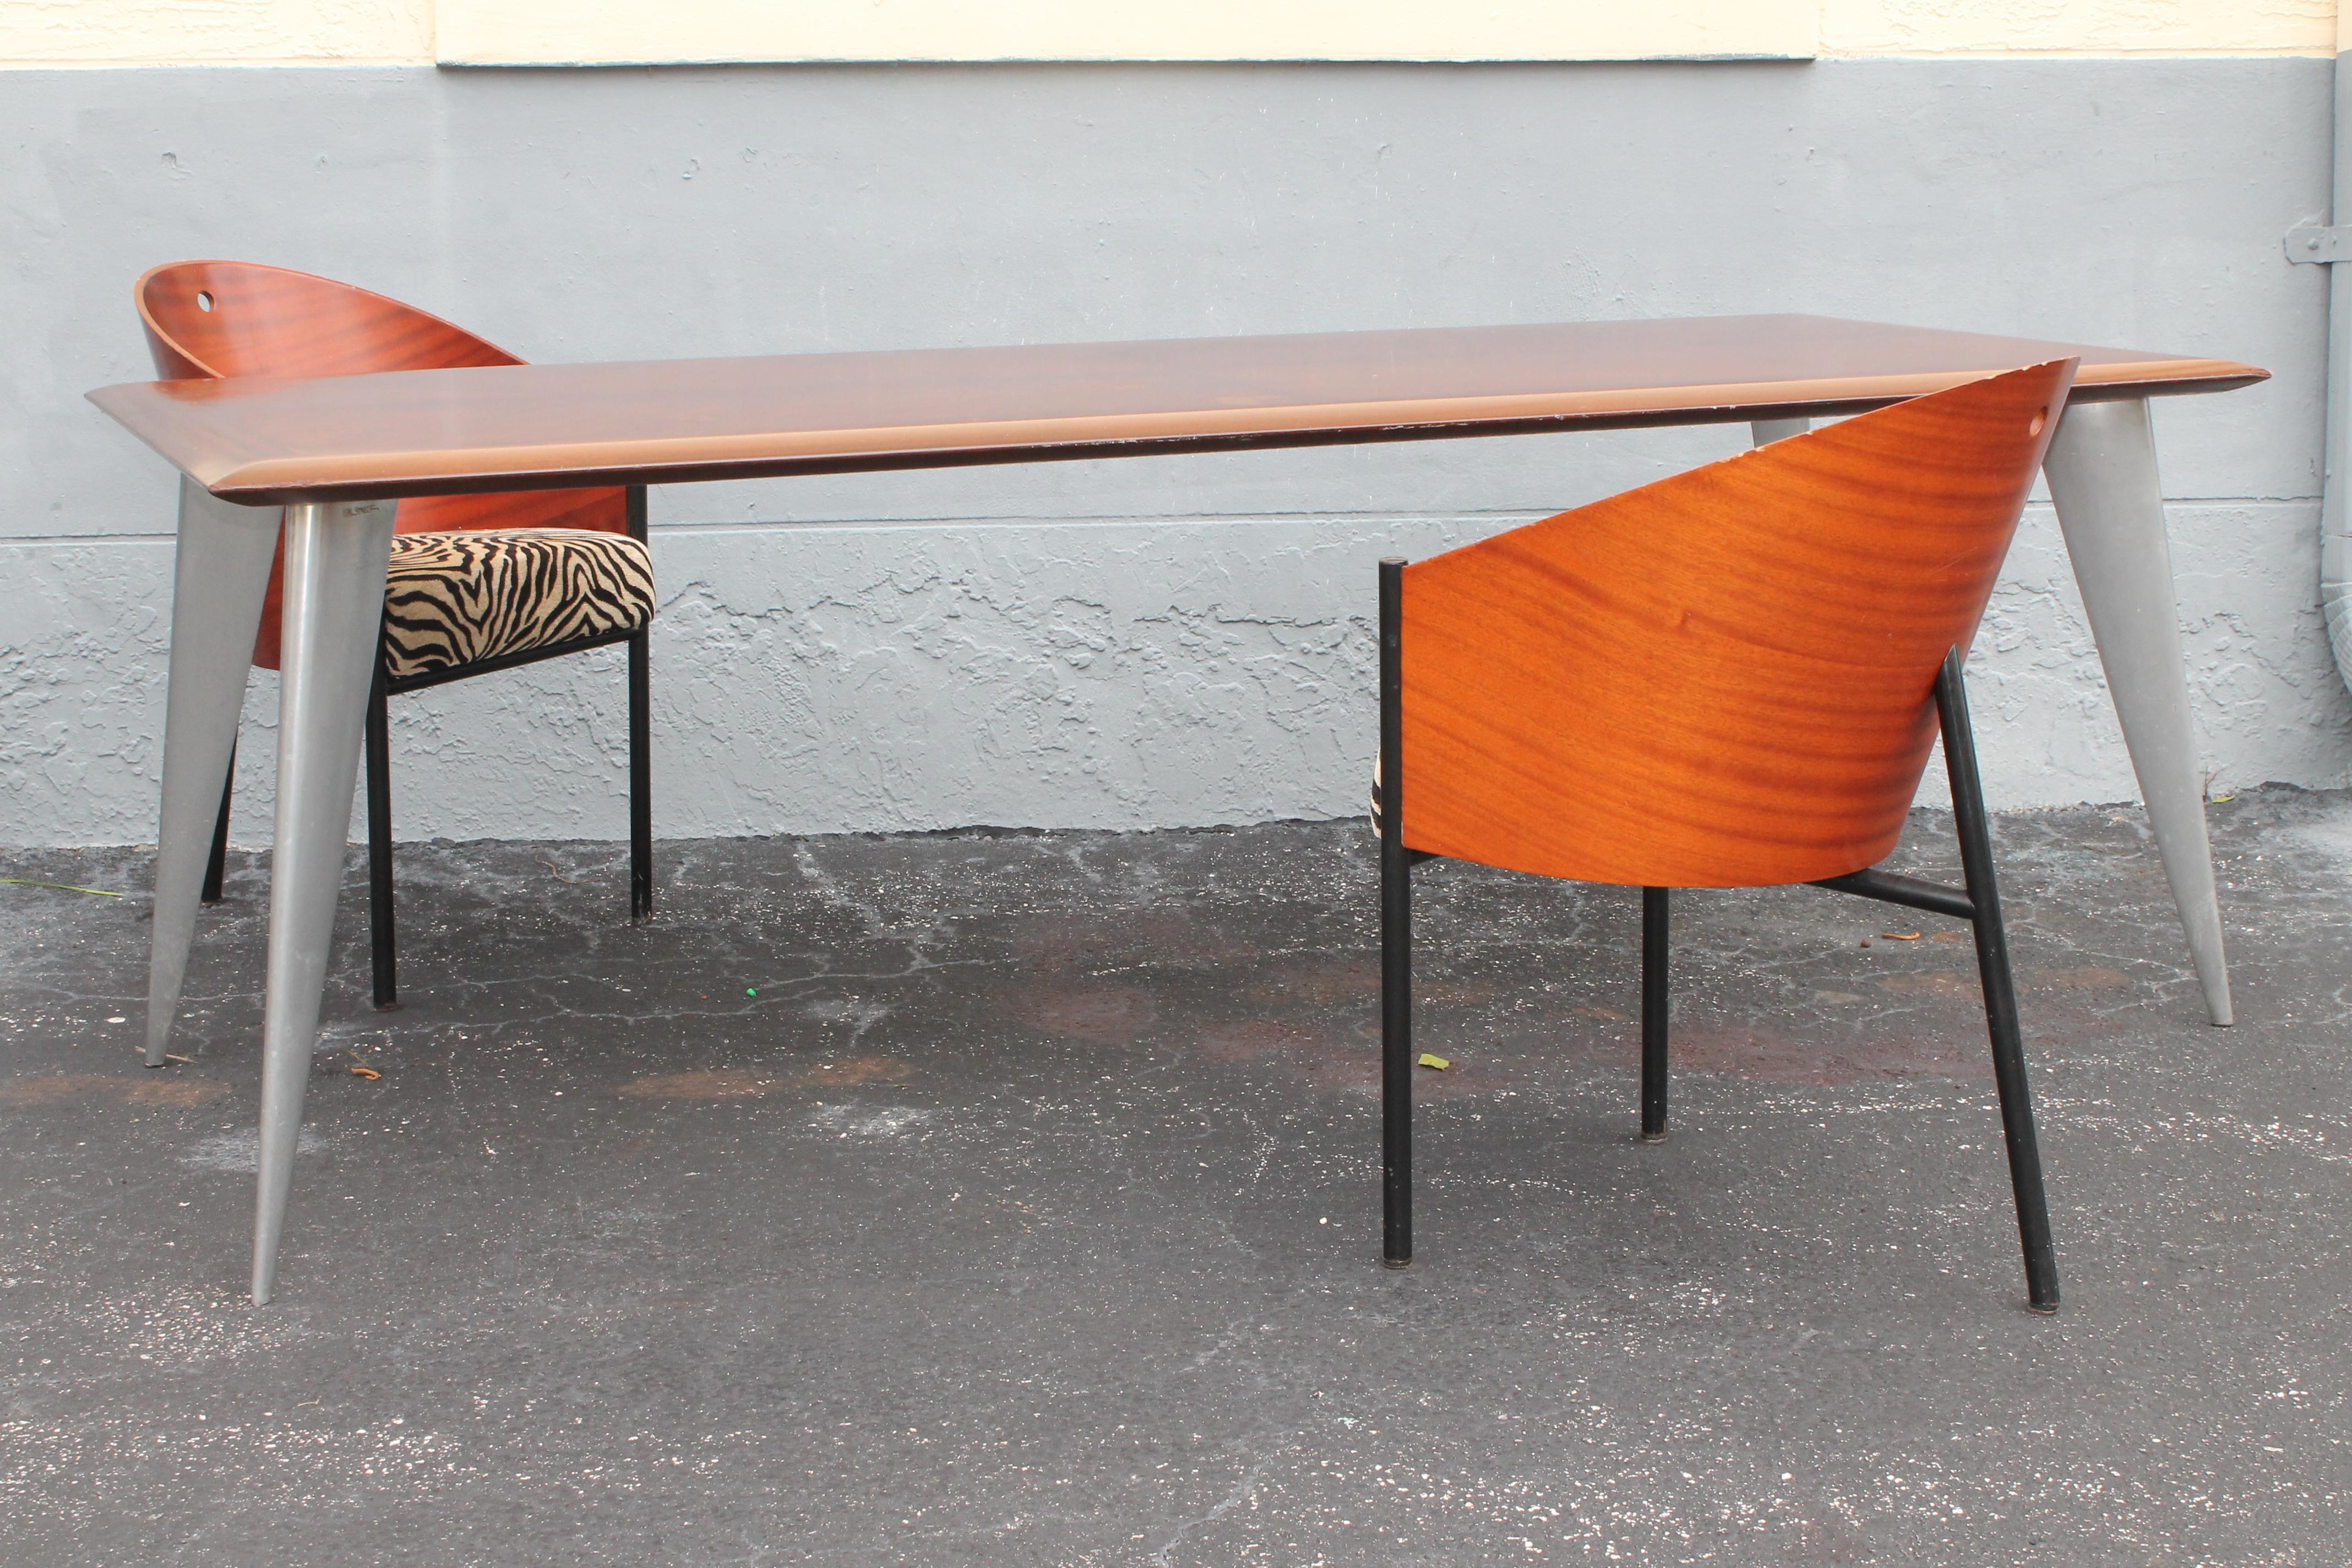 '80s Art Deco 9 Piece Dining Set Signed by Philippe Starck 8 Chairs+Dining Table For Sale 4